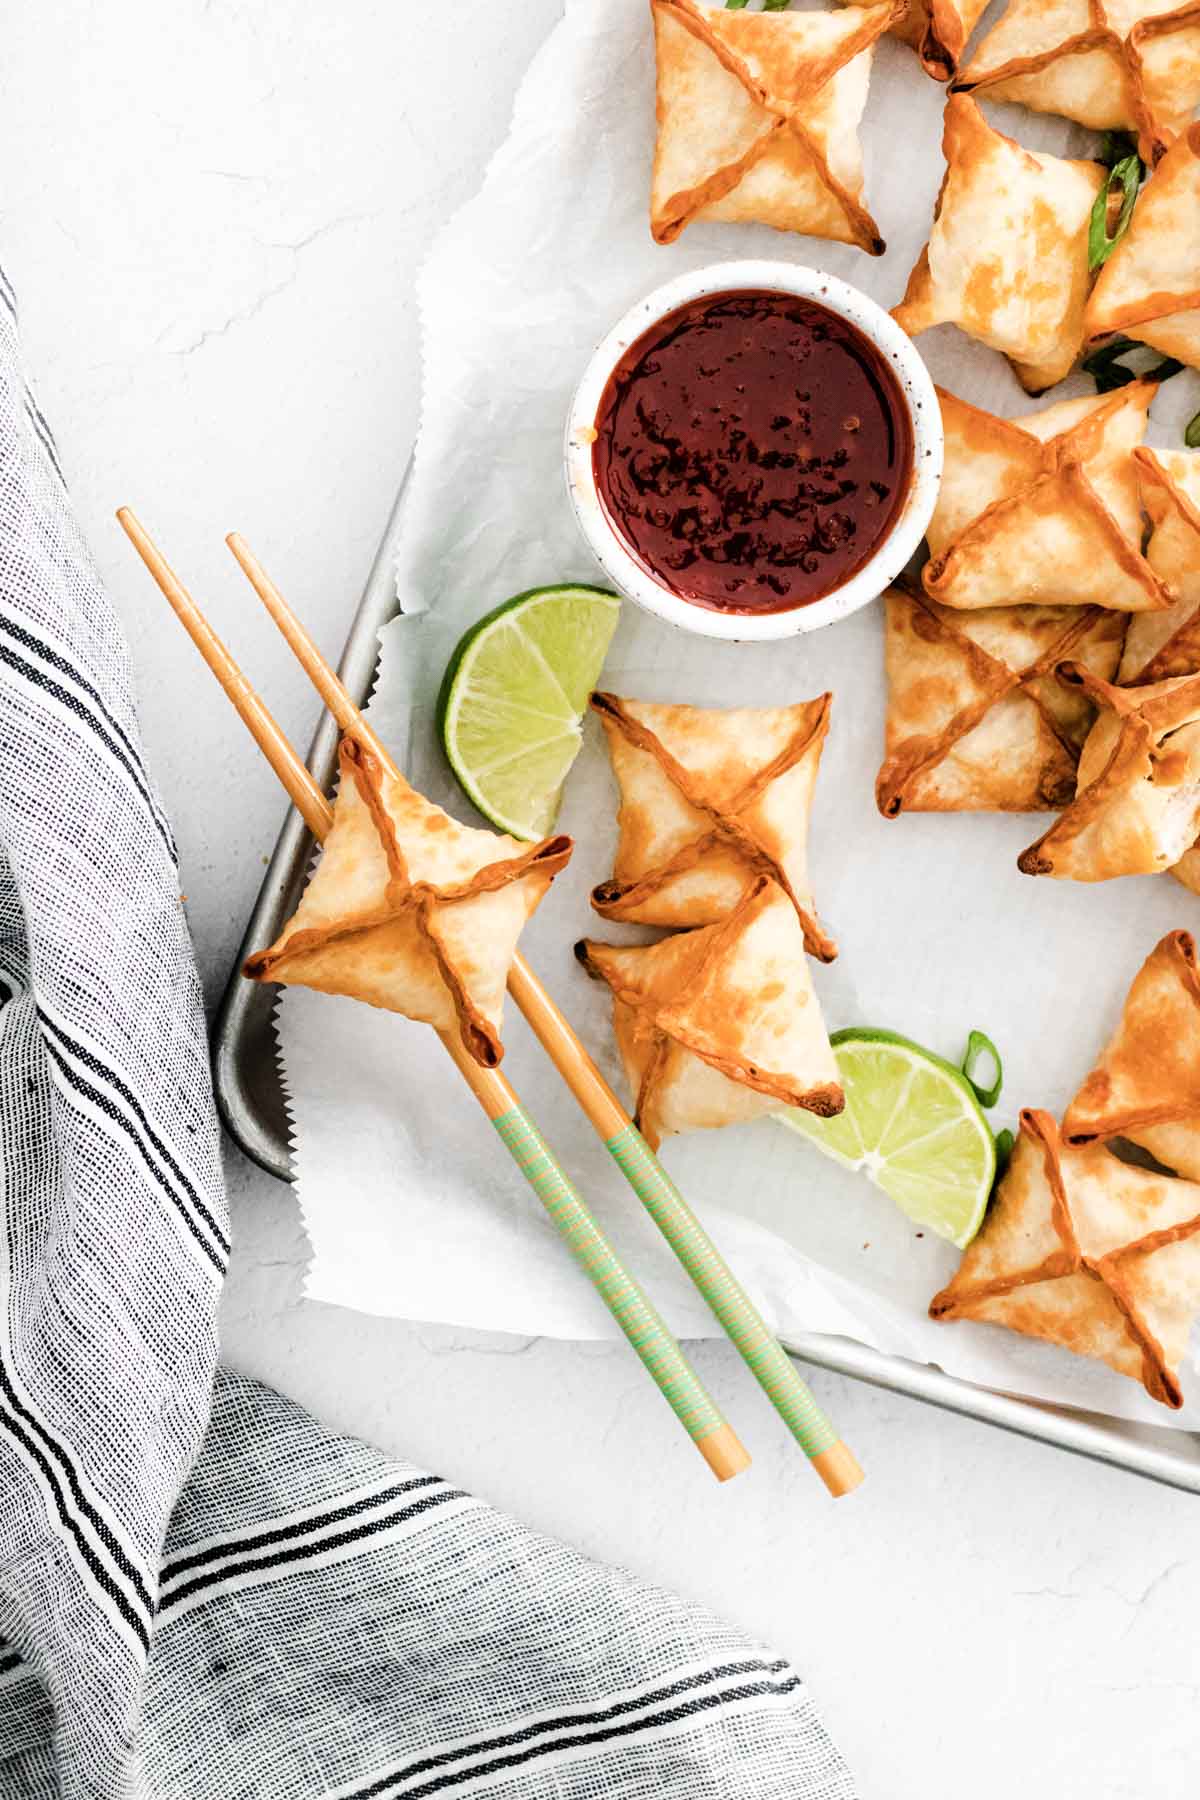 the finished air fryer crab rangoons served with chili sauce and chopsticks